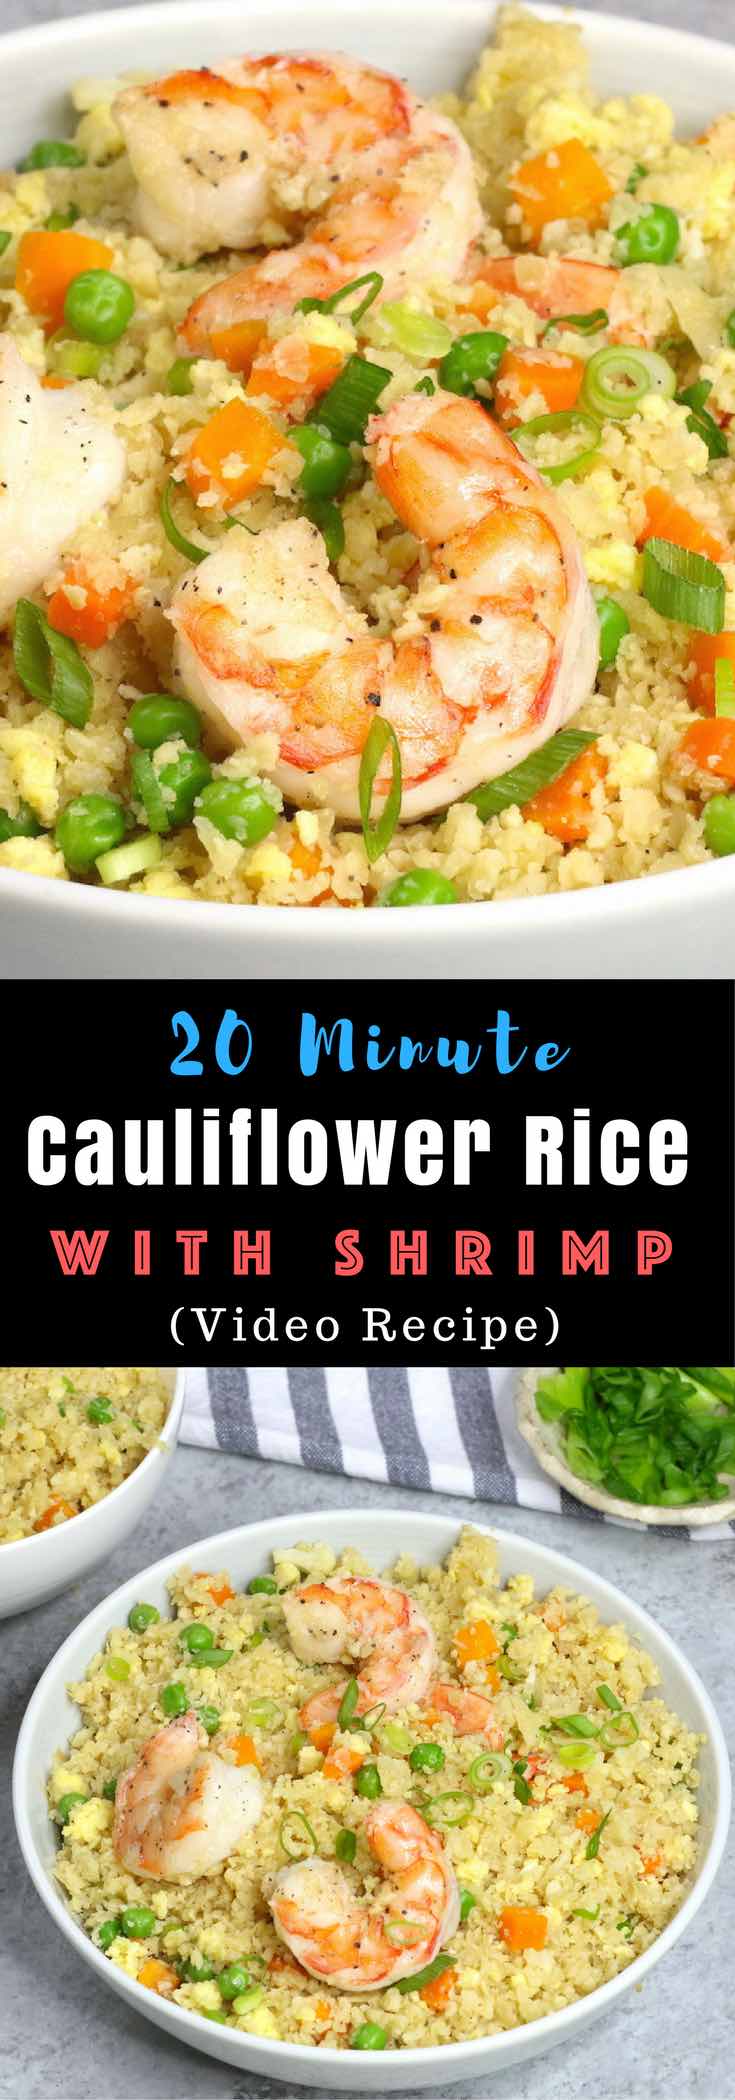 Cauliflower Shrimp Fried Rice is a healthy and low-carb dish loaded with shrimp and veggies with cauliflower rice. You can make it in just 20 minutes and serve as a main course or side dish. #cauliflowerrice #lowcarb #glutenfree